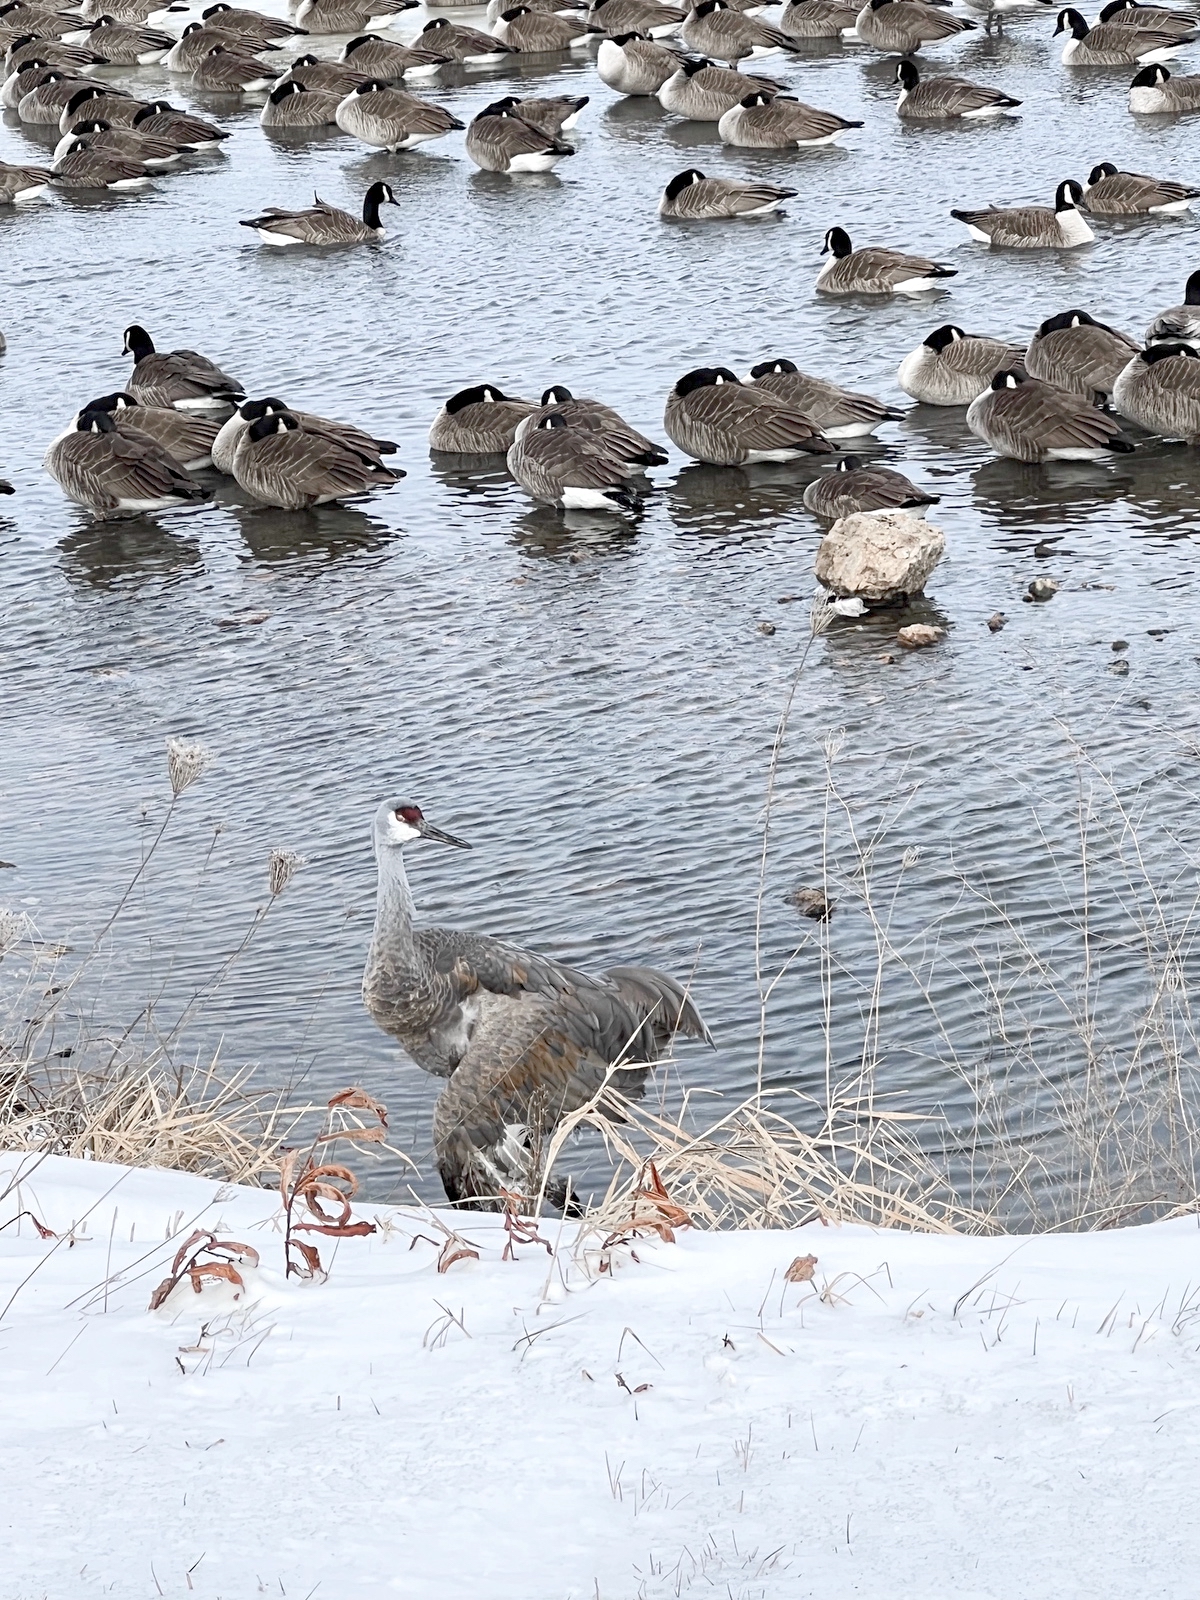 According to local photographer Justine Neslund, who was on the scene of the rescue, the crane’s broken wing was an old injury, as confirmed by Flint Creek owner Dawn Keller.